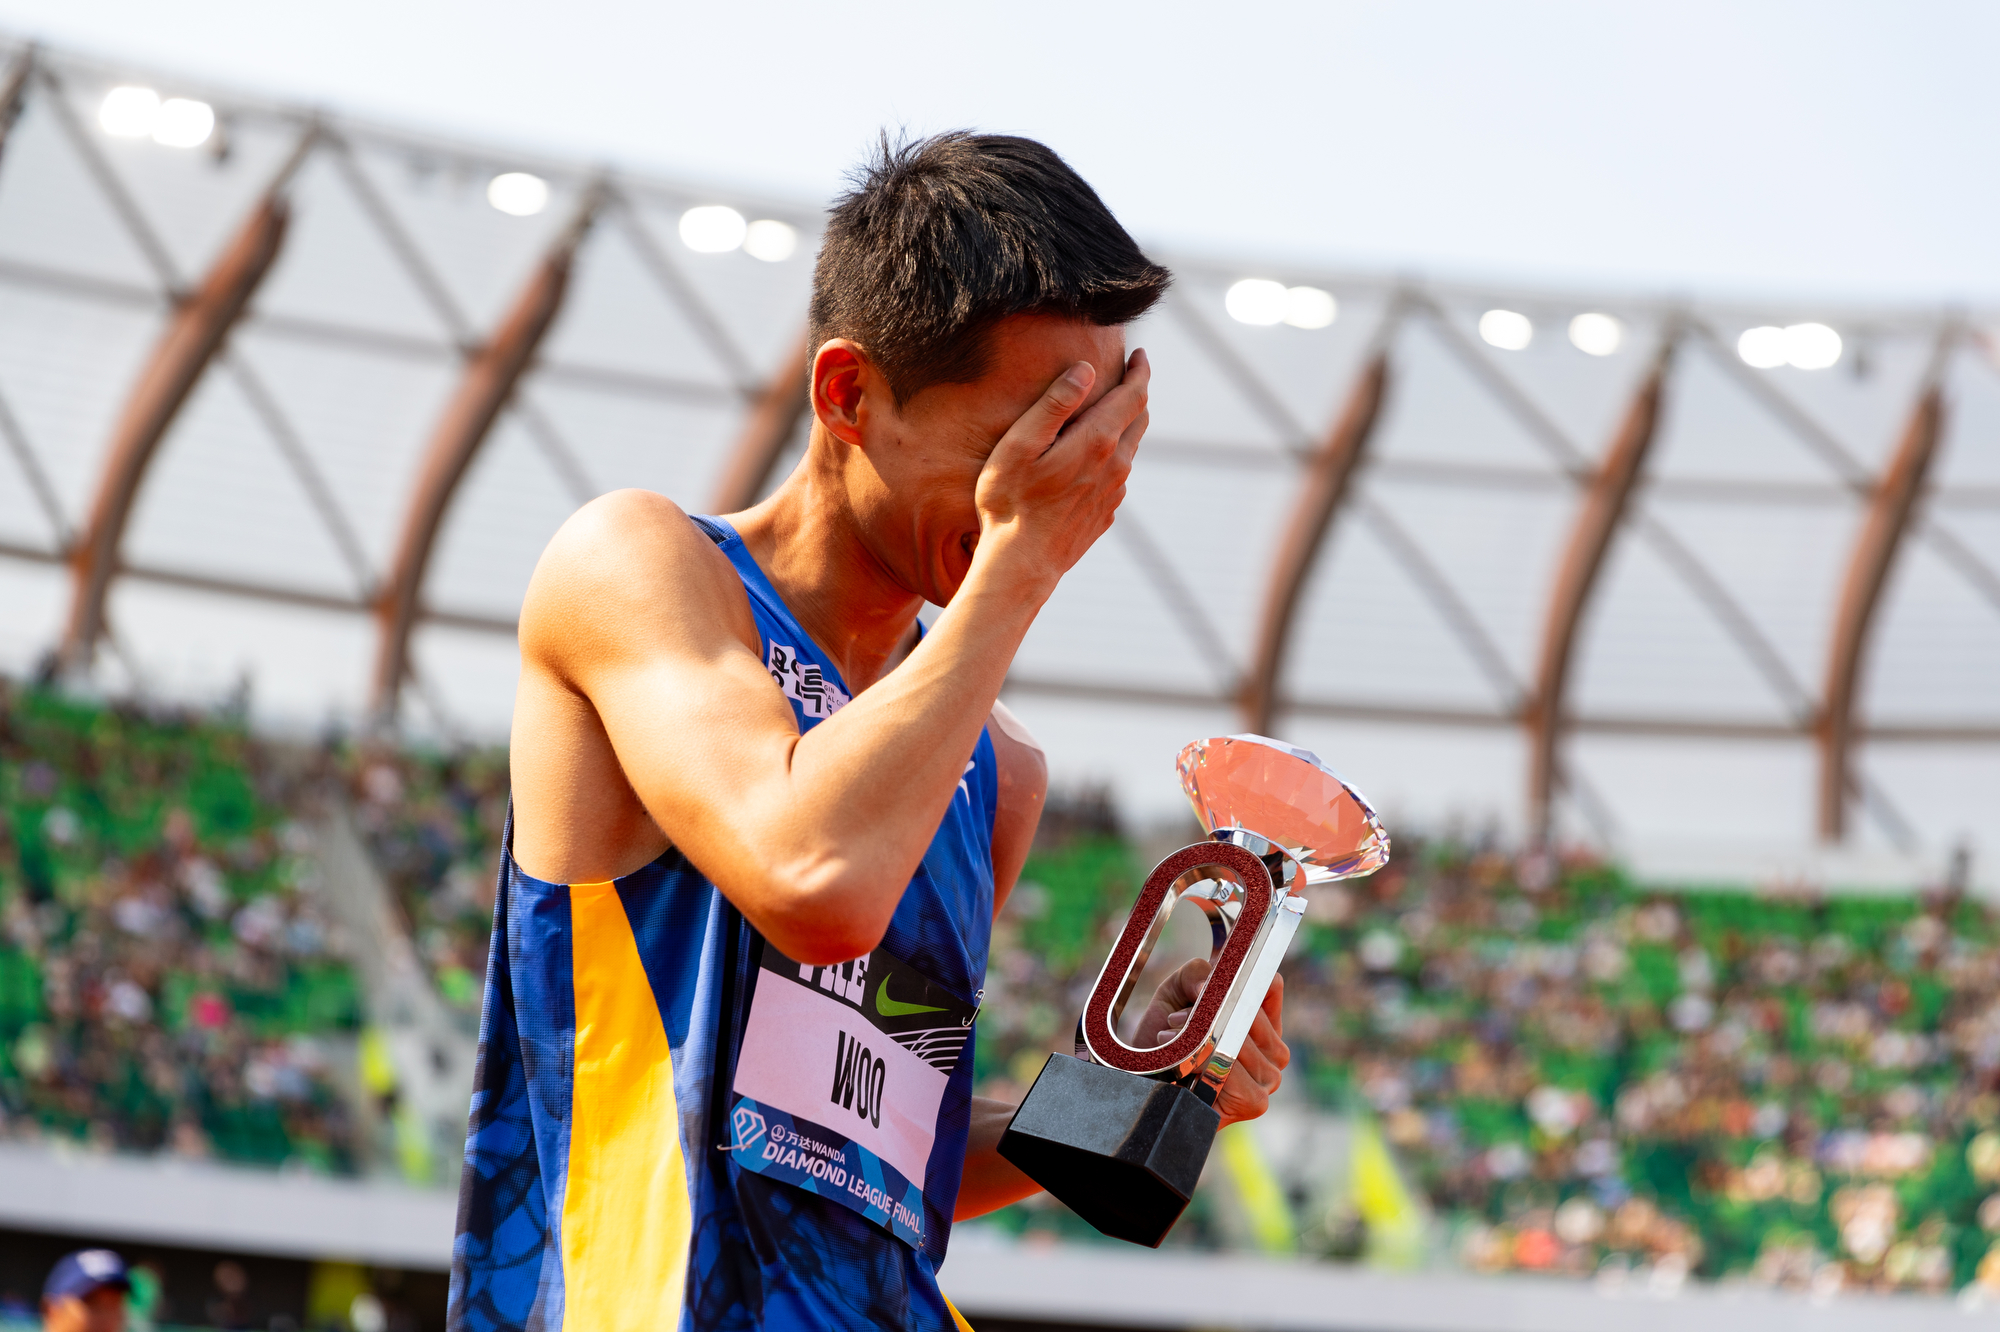 South Korea's Sanghyeok Woo celebrates with the Diamond League trophy after winning the men's high jump at the Prefontaine Classic track and field meet on Saturday, Sept. 16, 2023, at Hayward Field in Eugene.